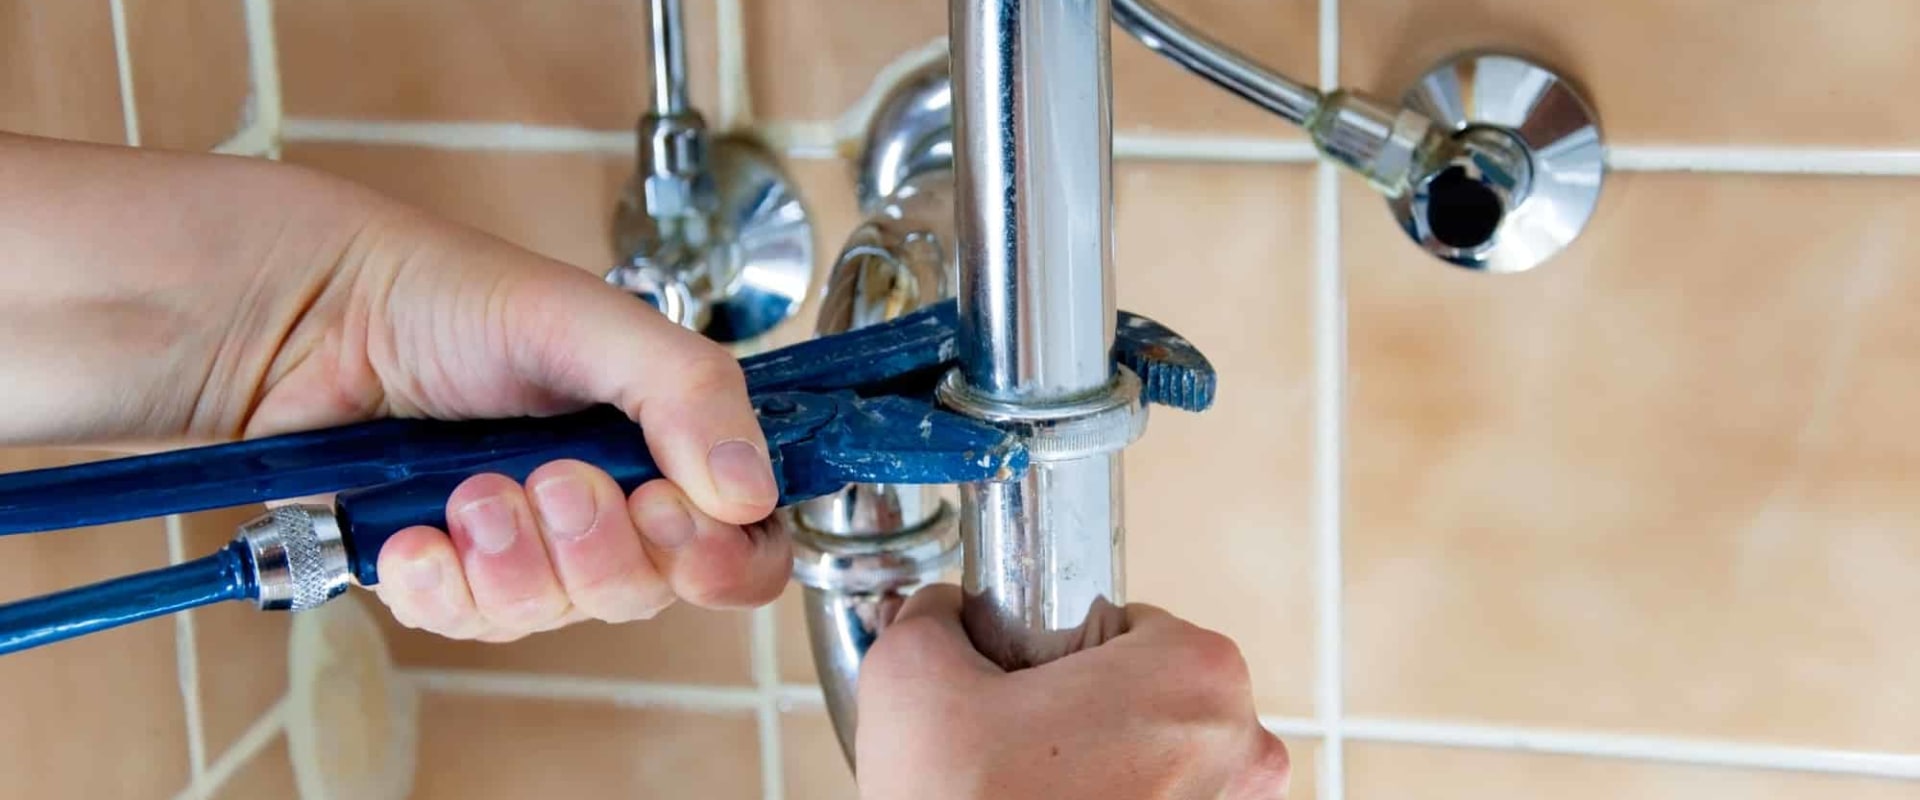 The Significance Of Employing A Plumber For Your Santa Cruz Gas Plumbing Project